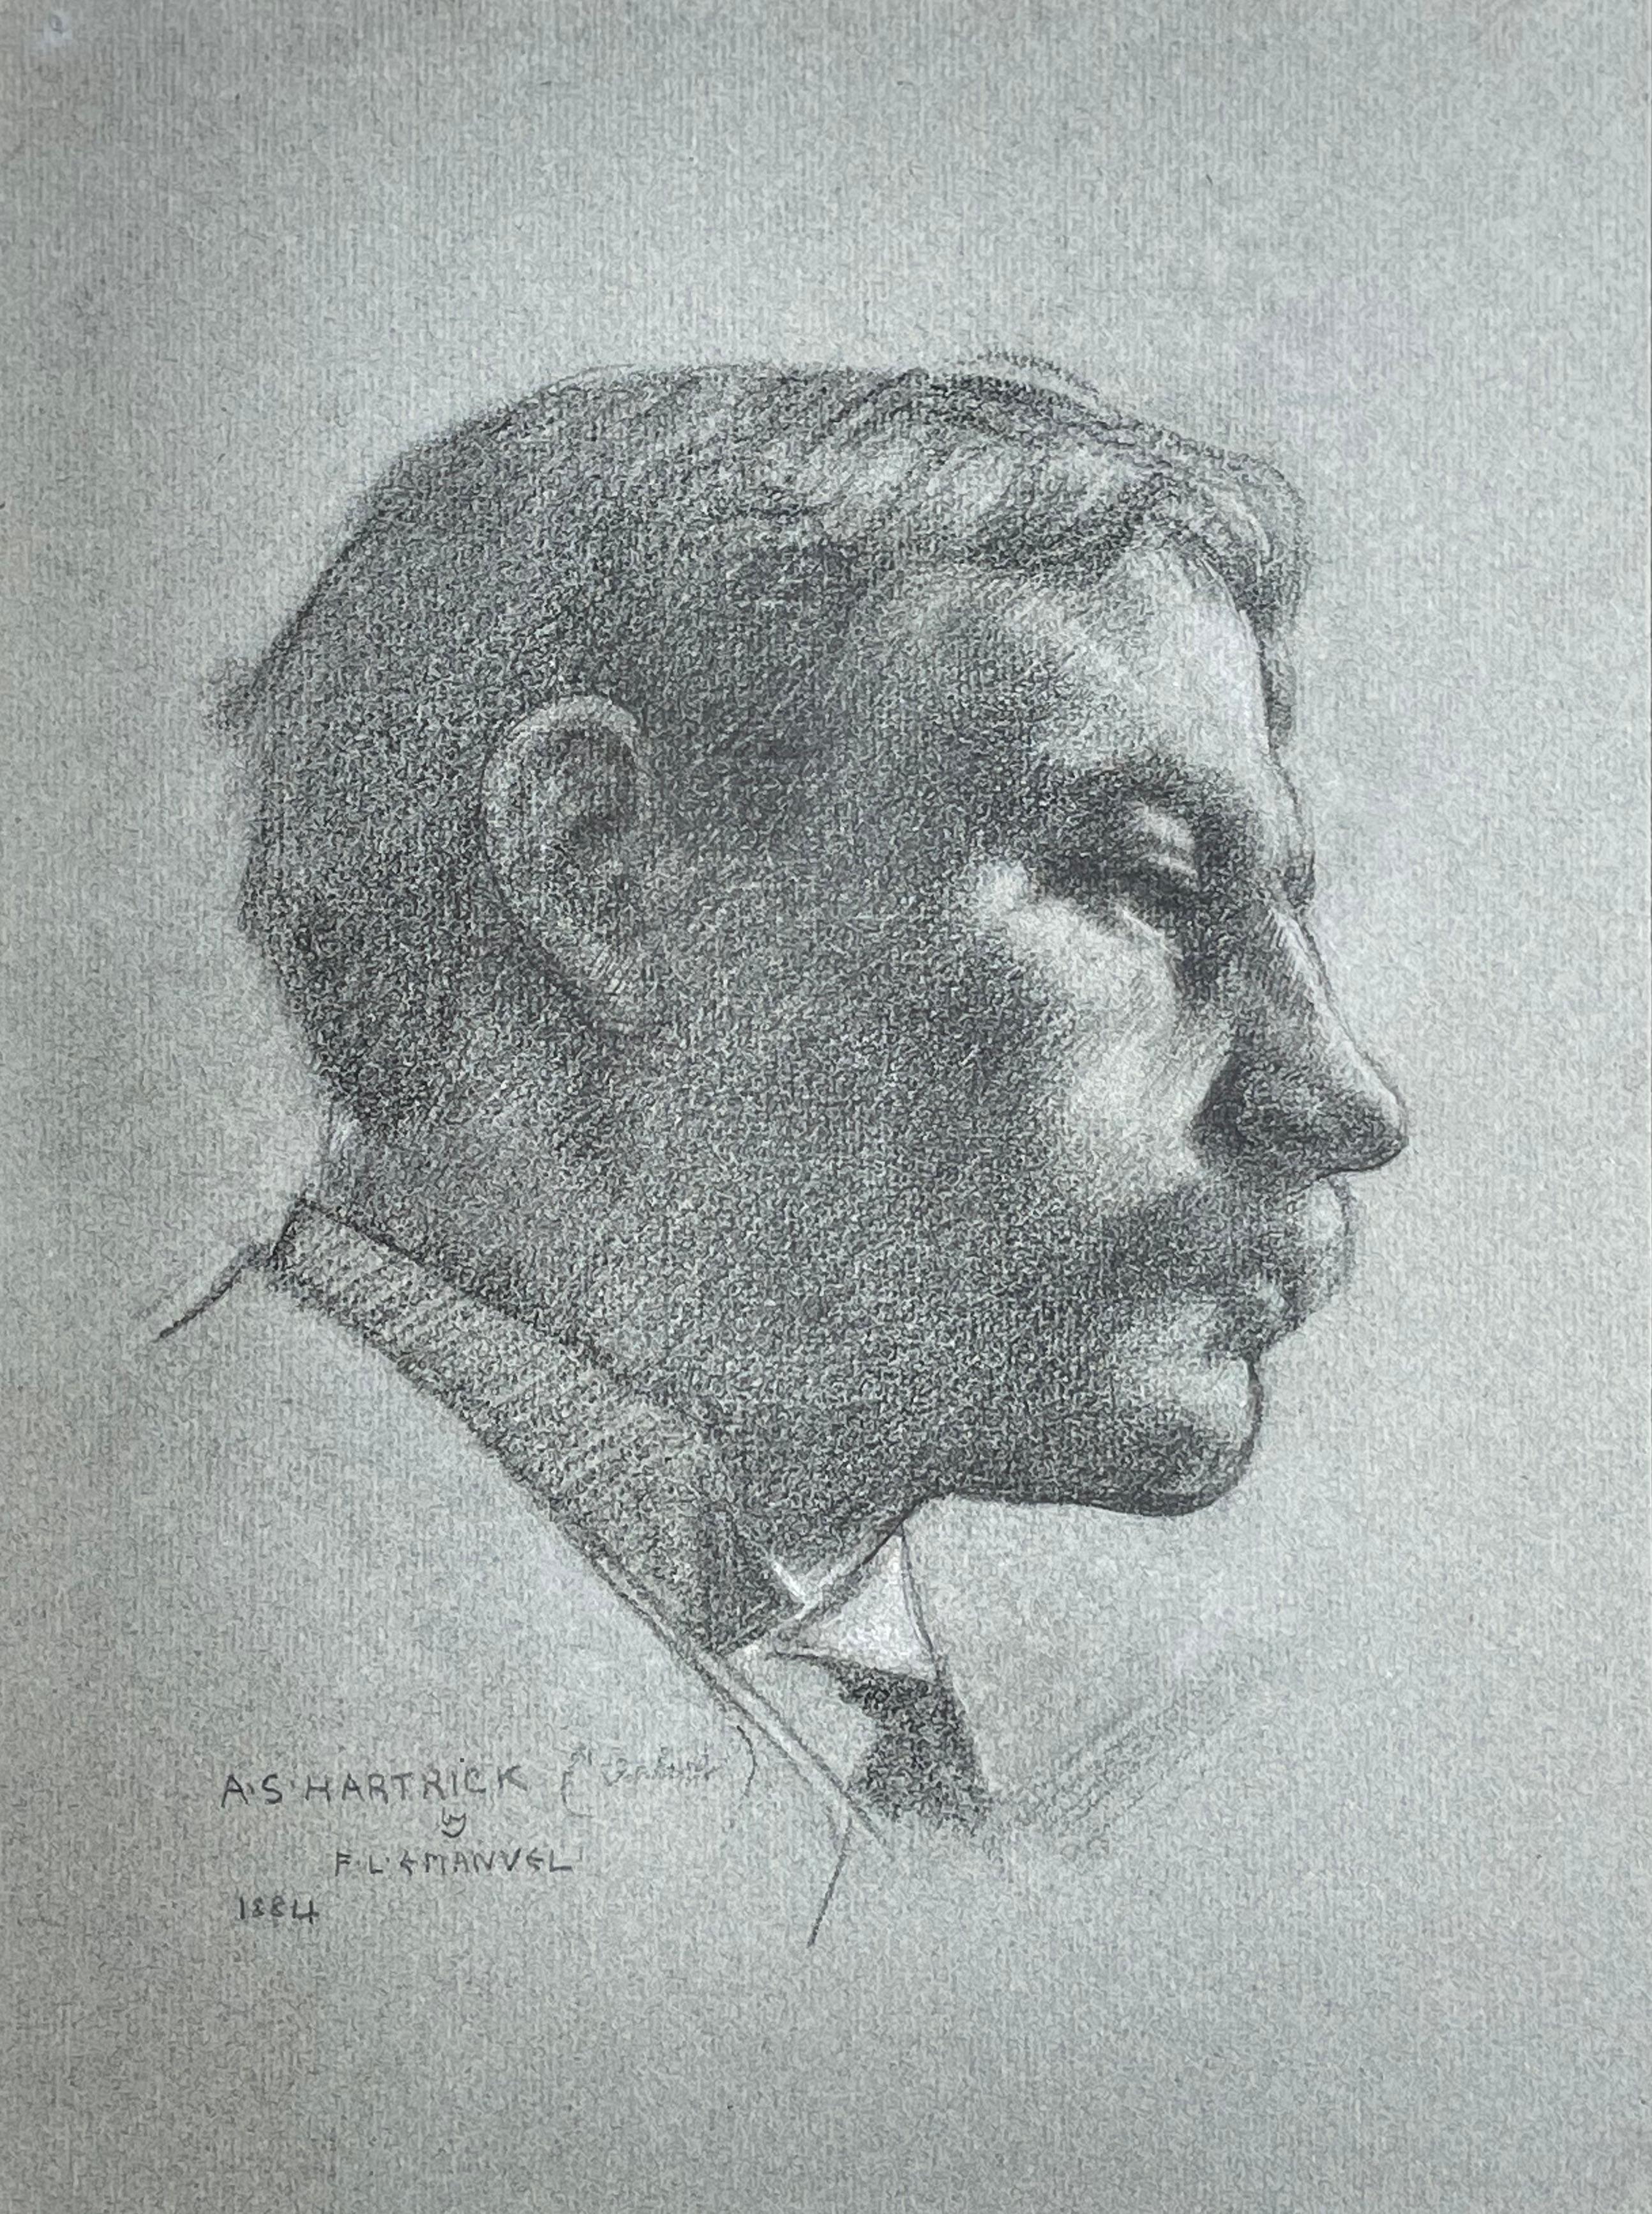 Portrait of Archibald Hartrick - 1884 chalk drawing by Frank Lewis Emanuel